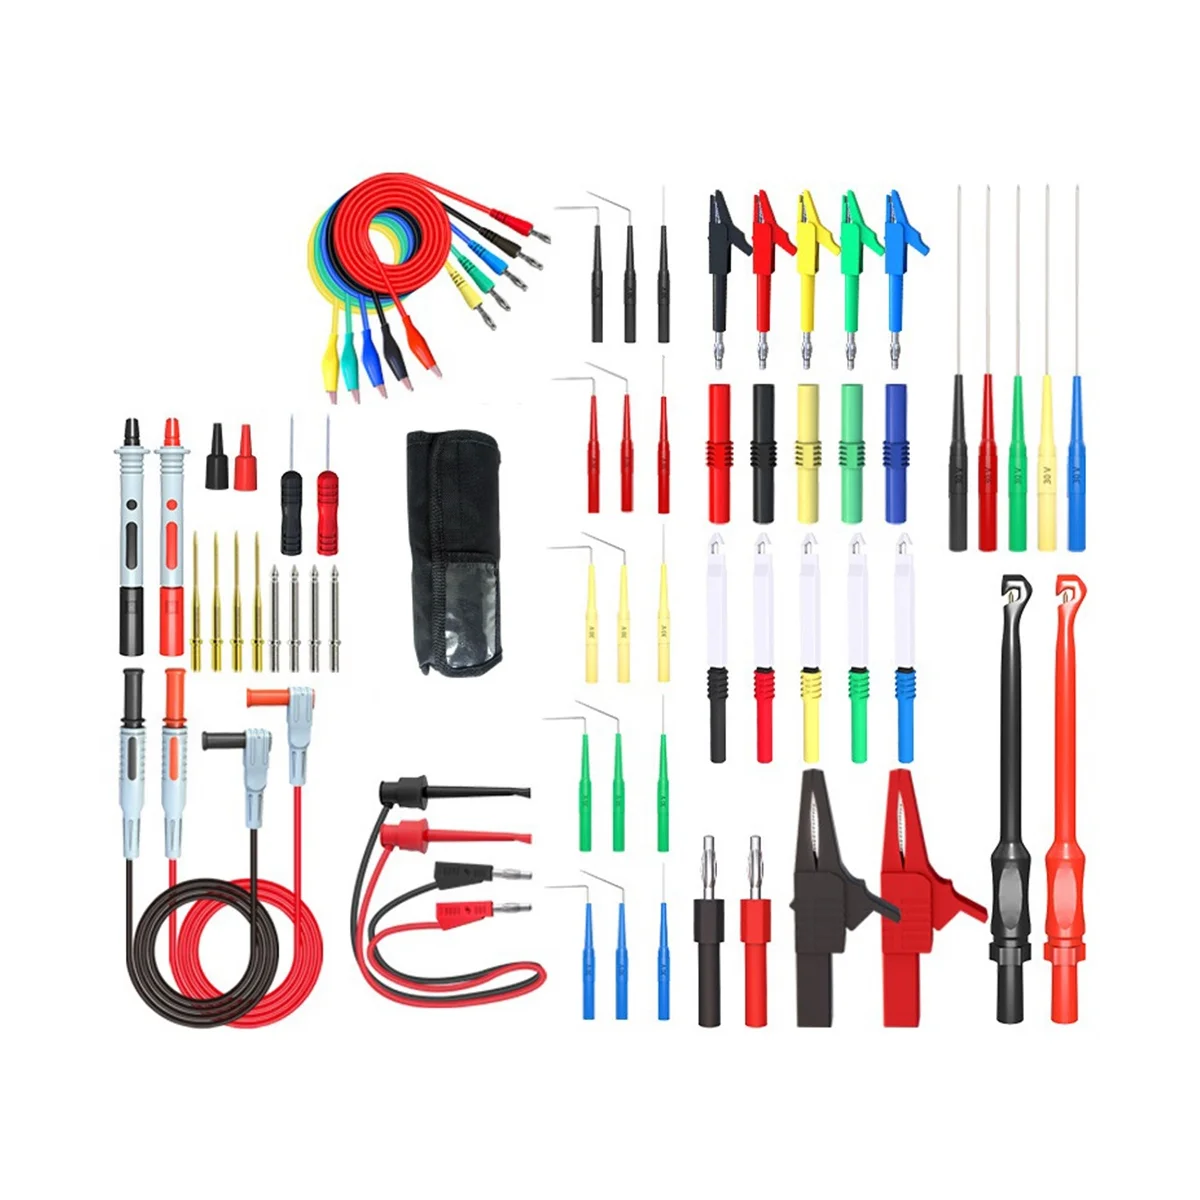 

P1957 64PCS Multimeter Wire Piercing Probes Test Leads Kit with Puncture Needle 4mm Banana Plug AlligatorClip